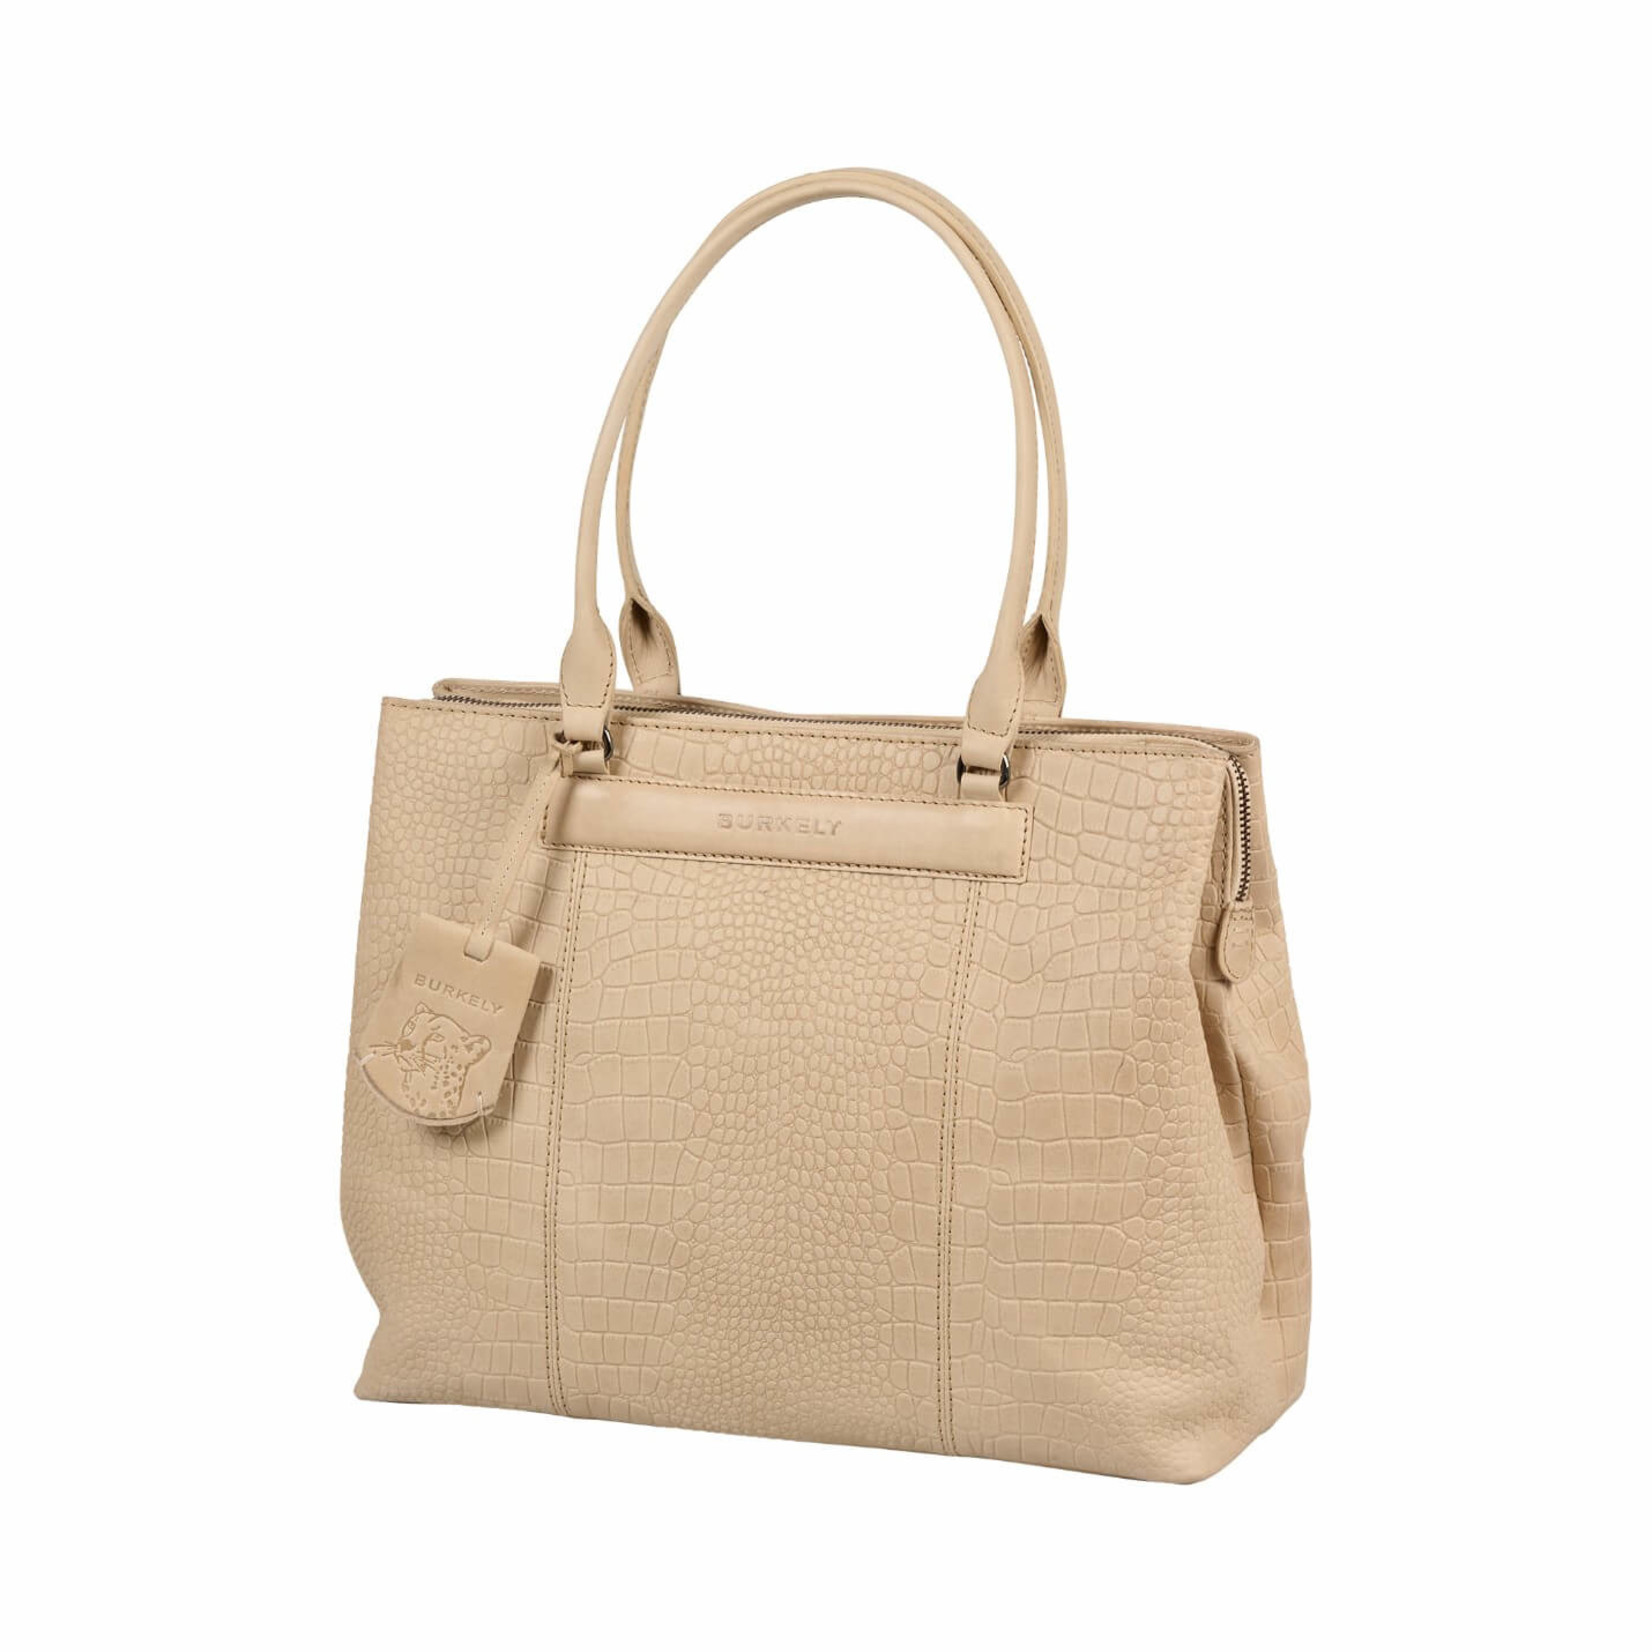 Burkely Workbag Carly